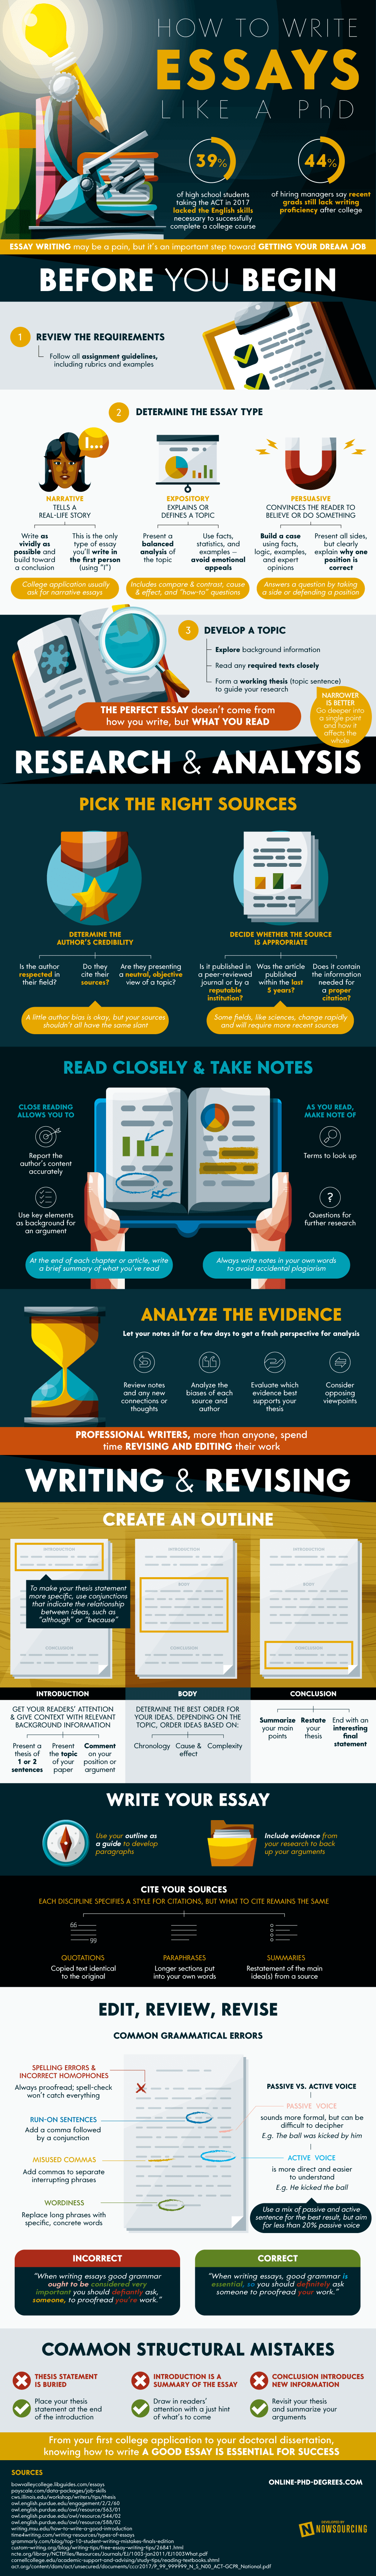 how-to-write-a-perfect-essay-like-a-phd-infographic